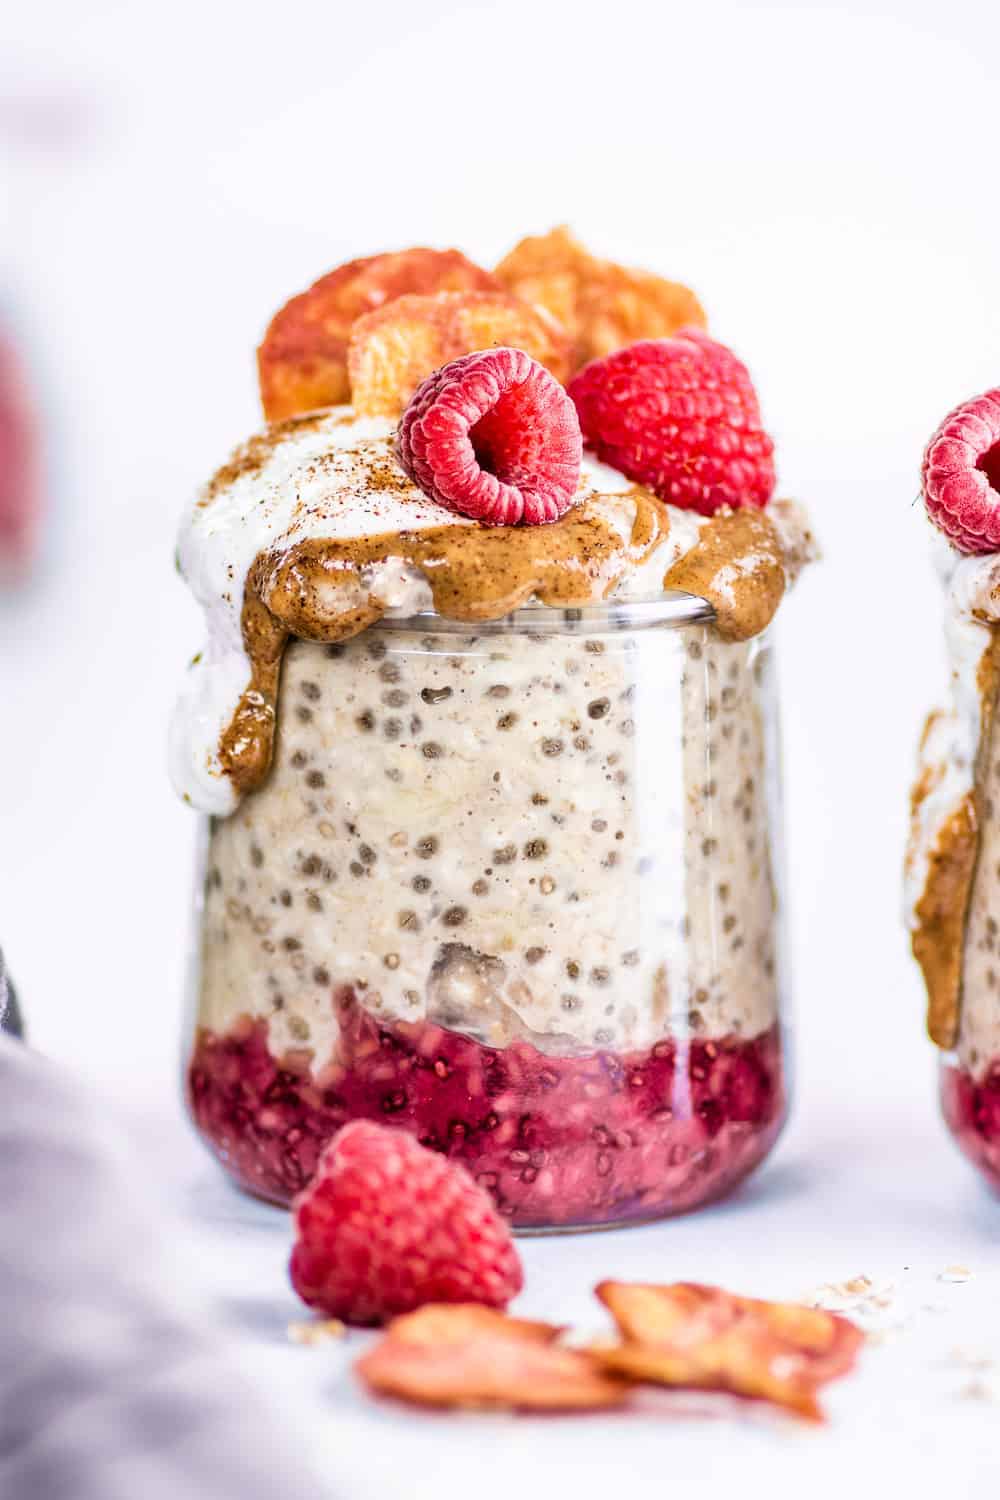 These easy banana overnight oats with chia seeds are vegan and gluten-free. Prep them in five minutes, and leave the rest of the work to the refrigerator. In the morning you have a delicious, nutritious breakfast waiting for you! Healthy and packed with fiber, this is an easy breakfast to take on the go. || The Butter Half #overnightoats #breakfast #vegan #glutenfree #thebutterhalf